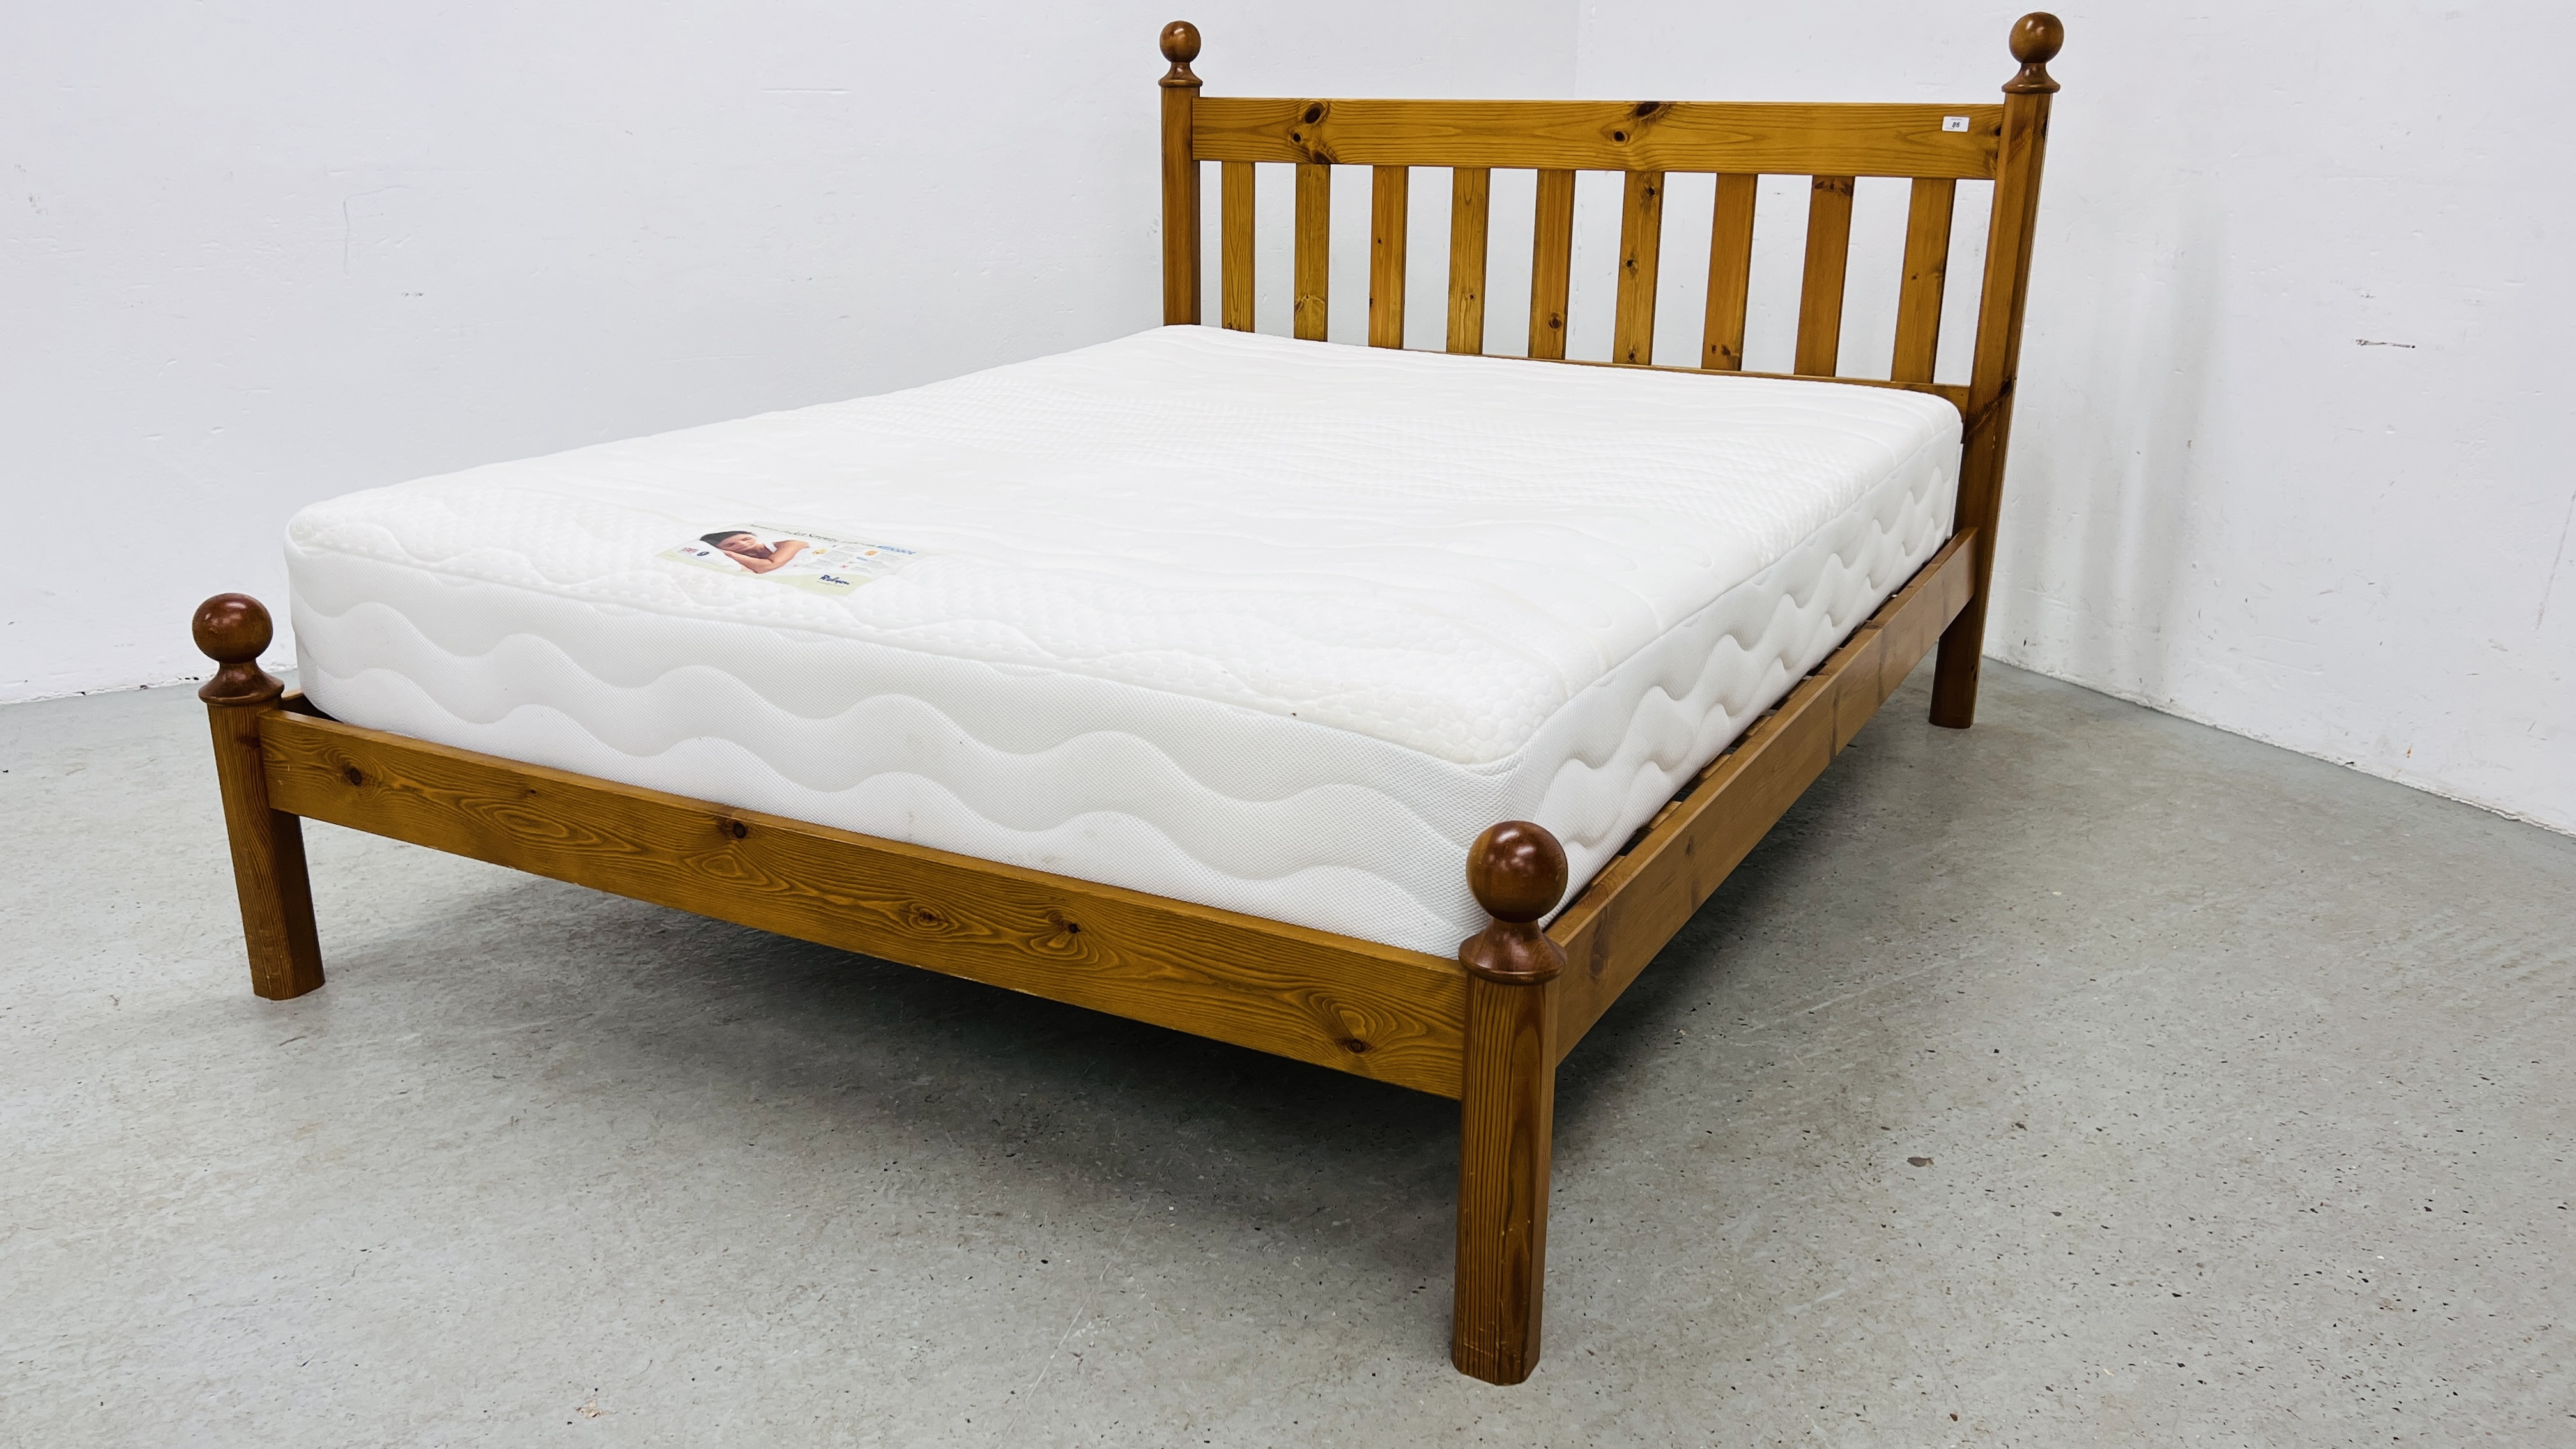 SOLID PINE KING SIZE BEDSTEAD FITTED WITH REYLON MEMORY POCKET 1500 AIRCOOL MATTRESS